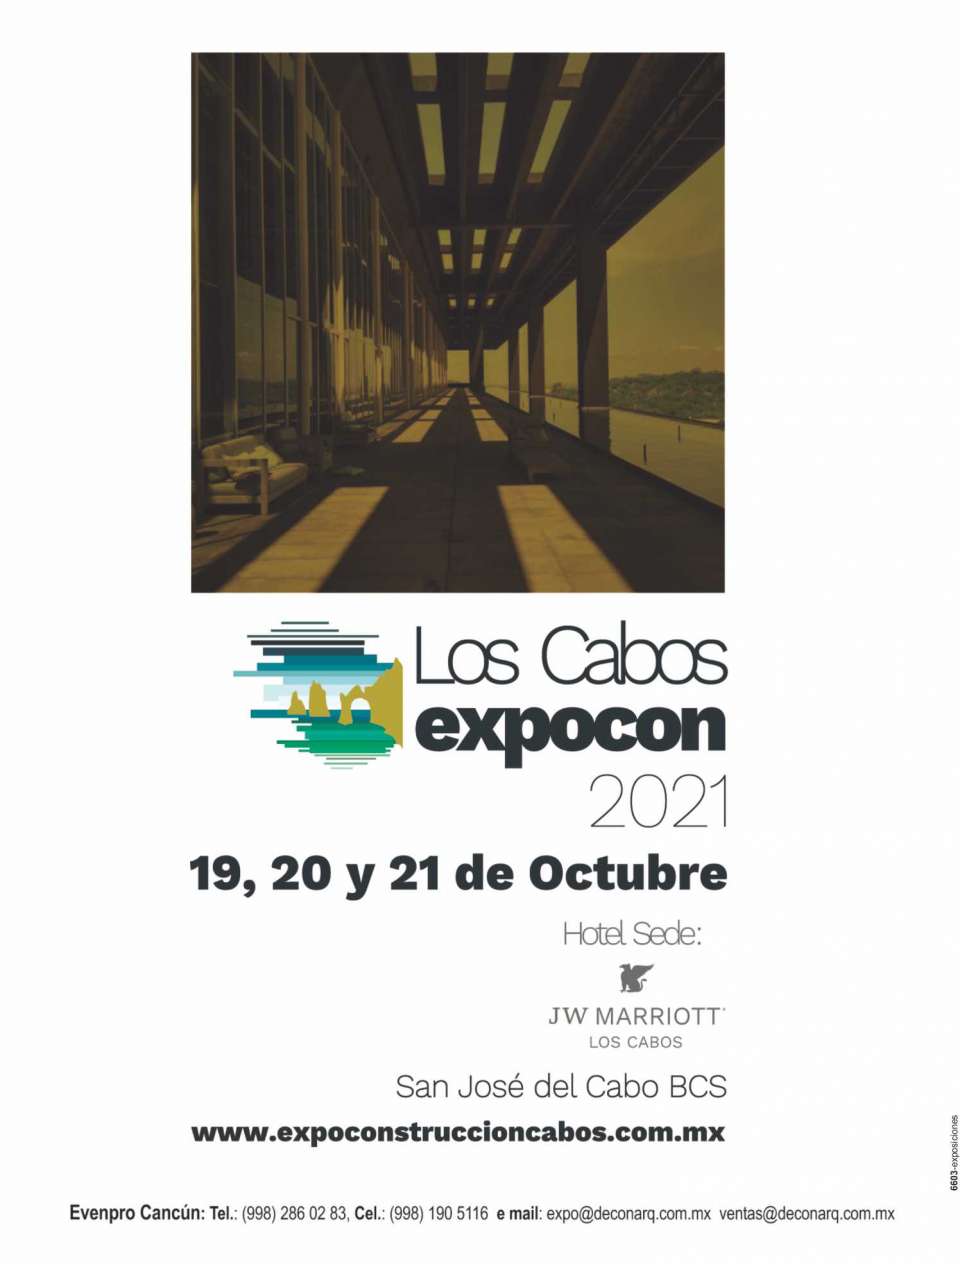 Los Cabos Construction trade show from October 19 to 21, 2021 at San Jose del Cabo.